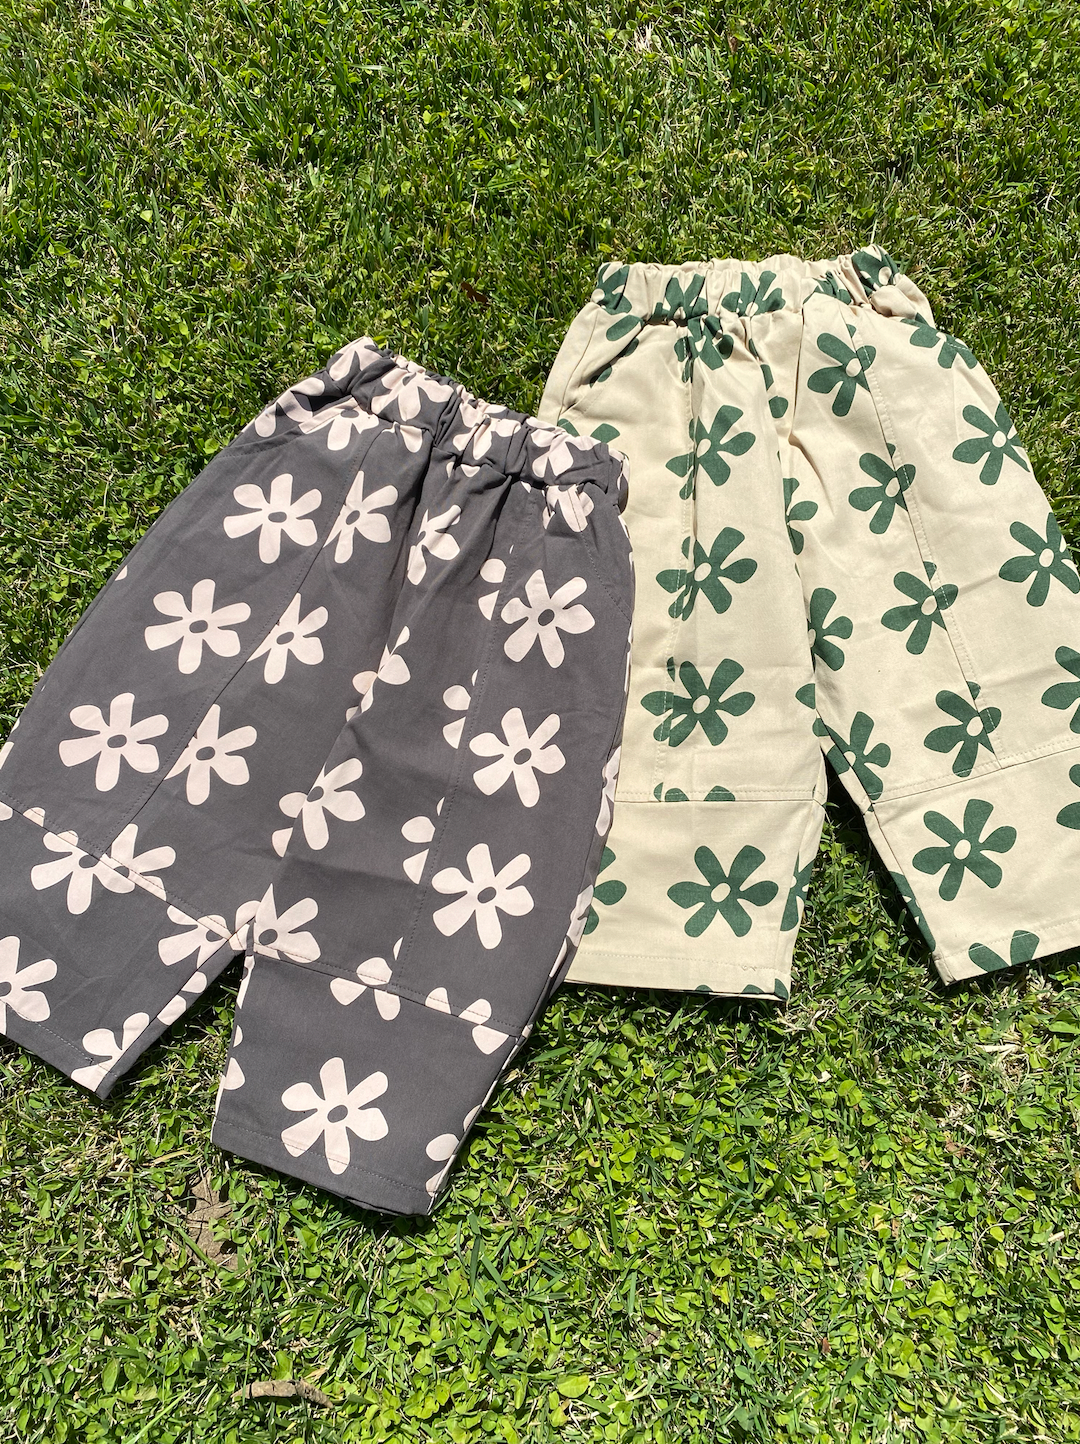 Two pairs of kids' pants laid on grass: one in gray with cream flowers, one in cream with green flowers